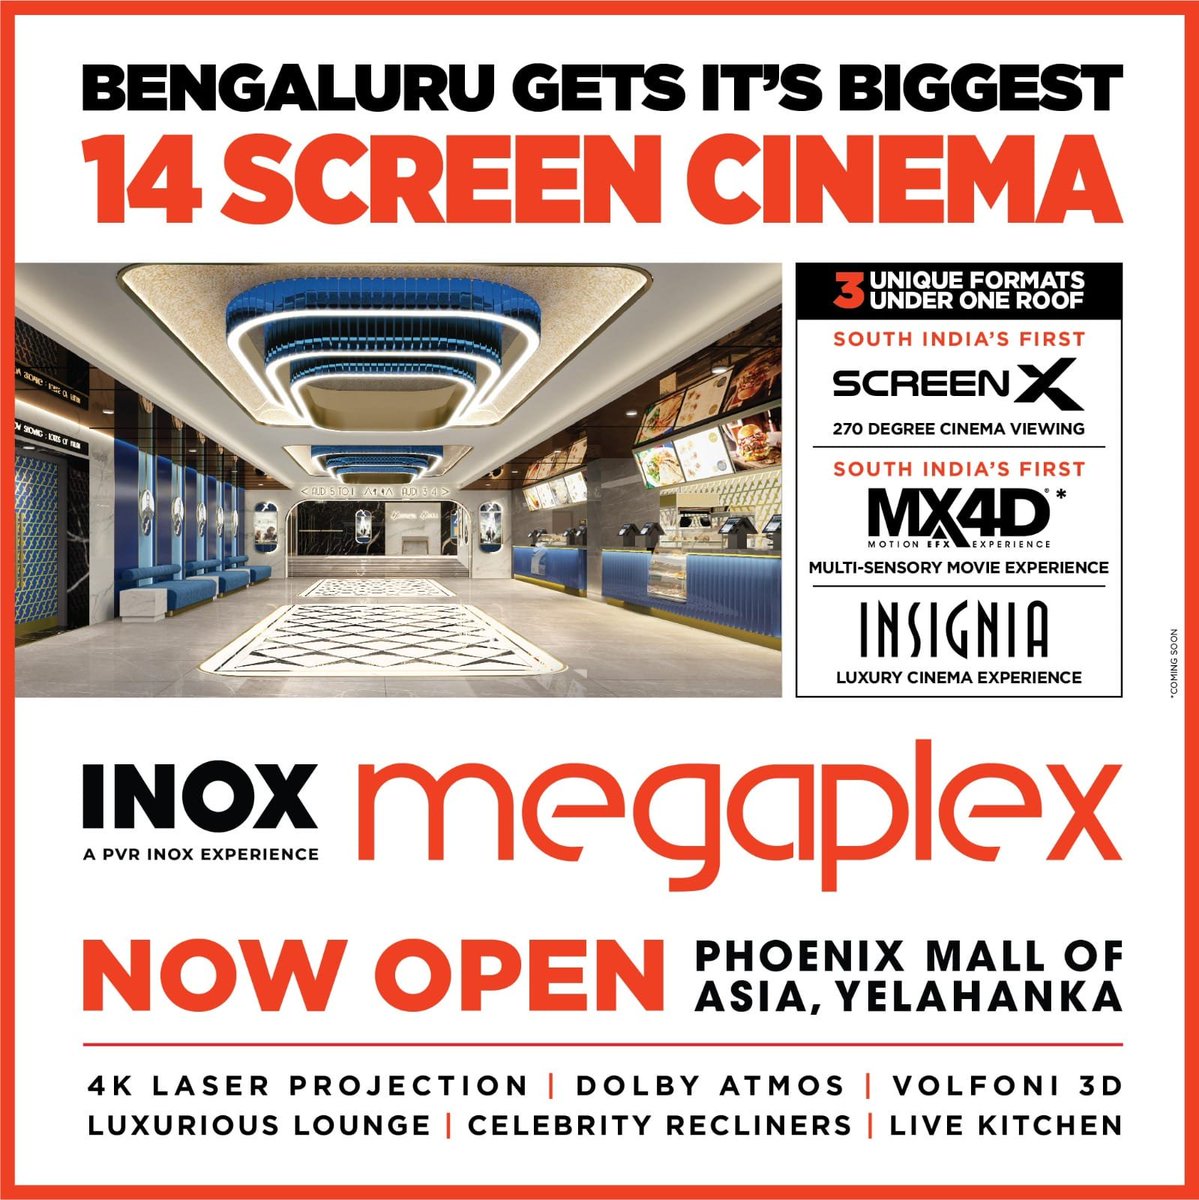 Bengaluru is all set to dazzle with its biggest ever 14-screen INOX cinema now opened in Phoenix Mall of Asia, Yelahanka! 🎬⭐️ It houses three unique formats, namely Screen X, MX 4D, and Insignia, under one roof and comes with 4K laser projection, Dolby Atmos, a Volfoni 3D…